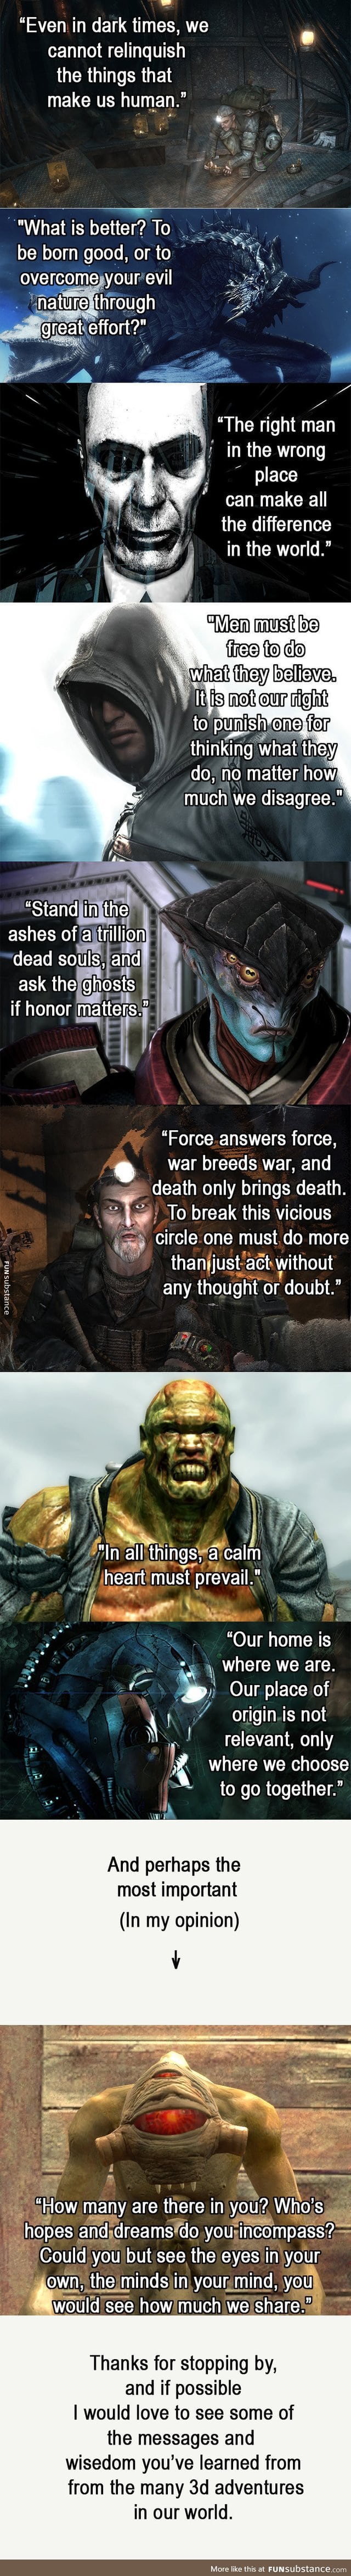 Quotes from games